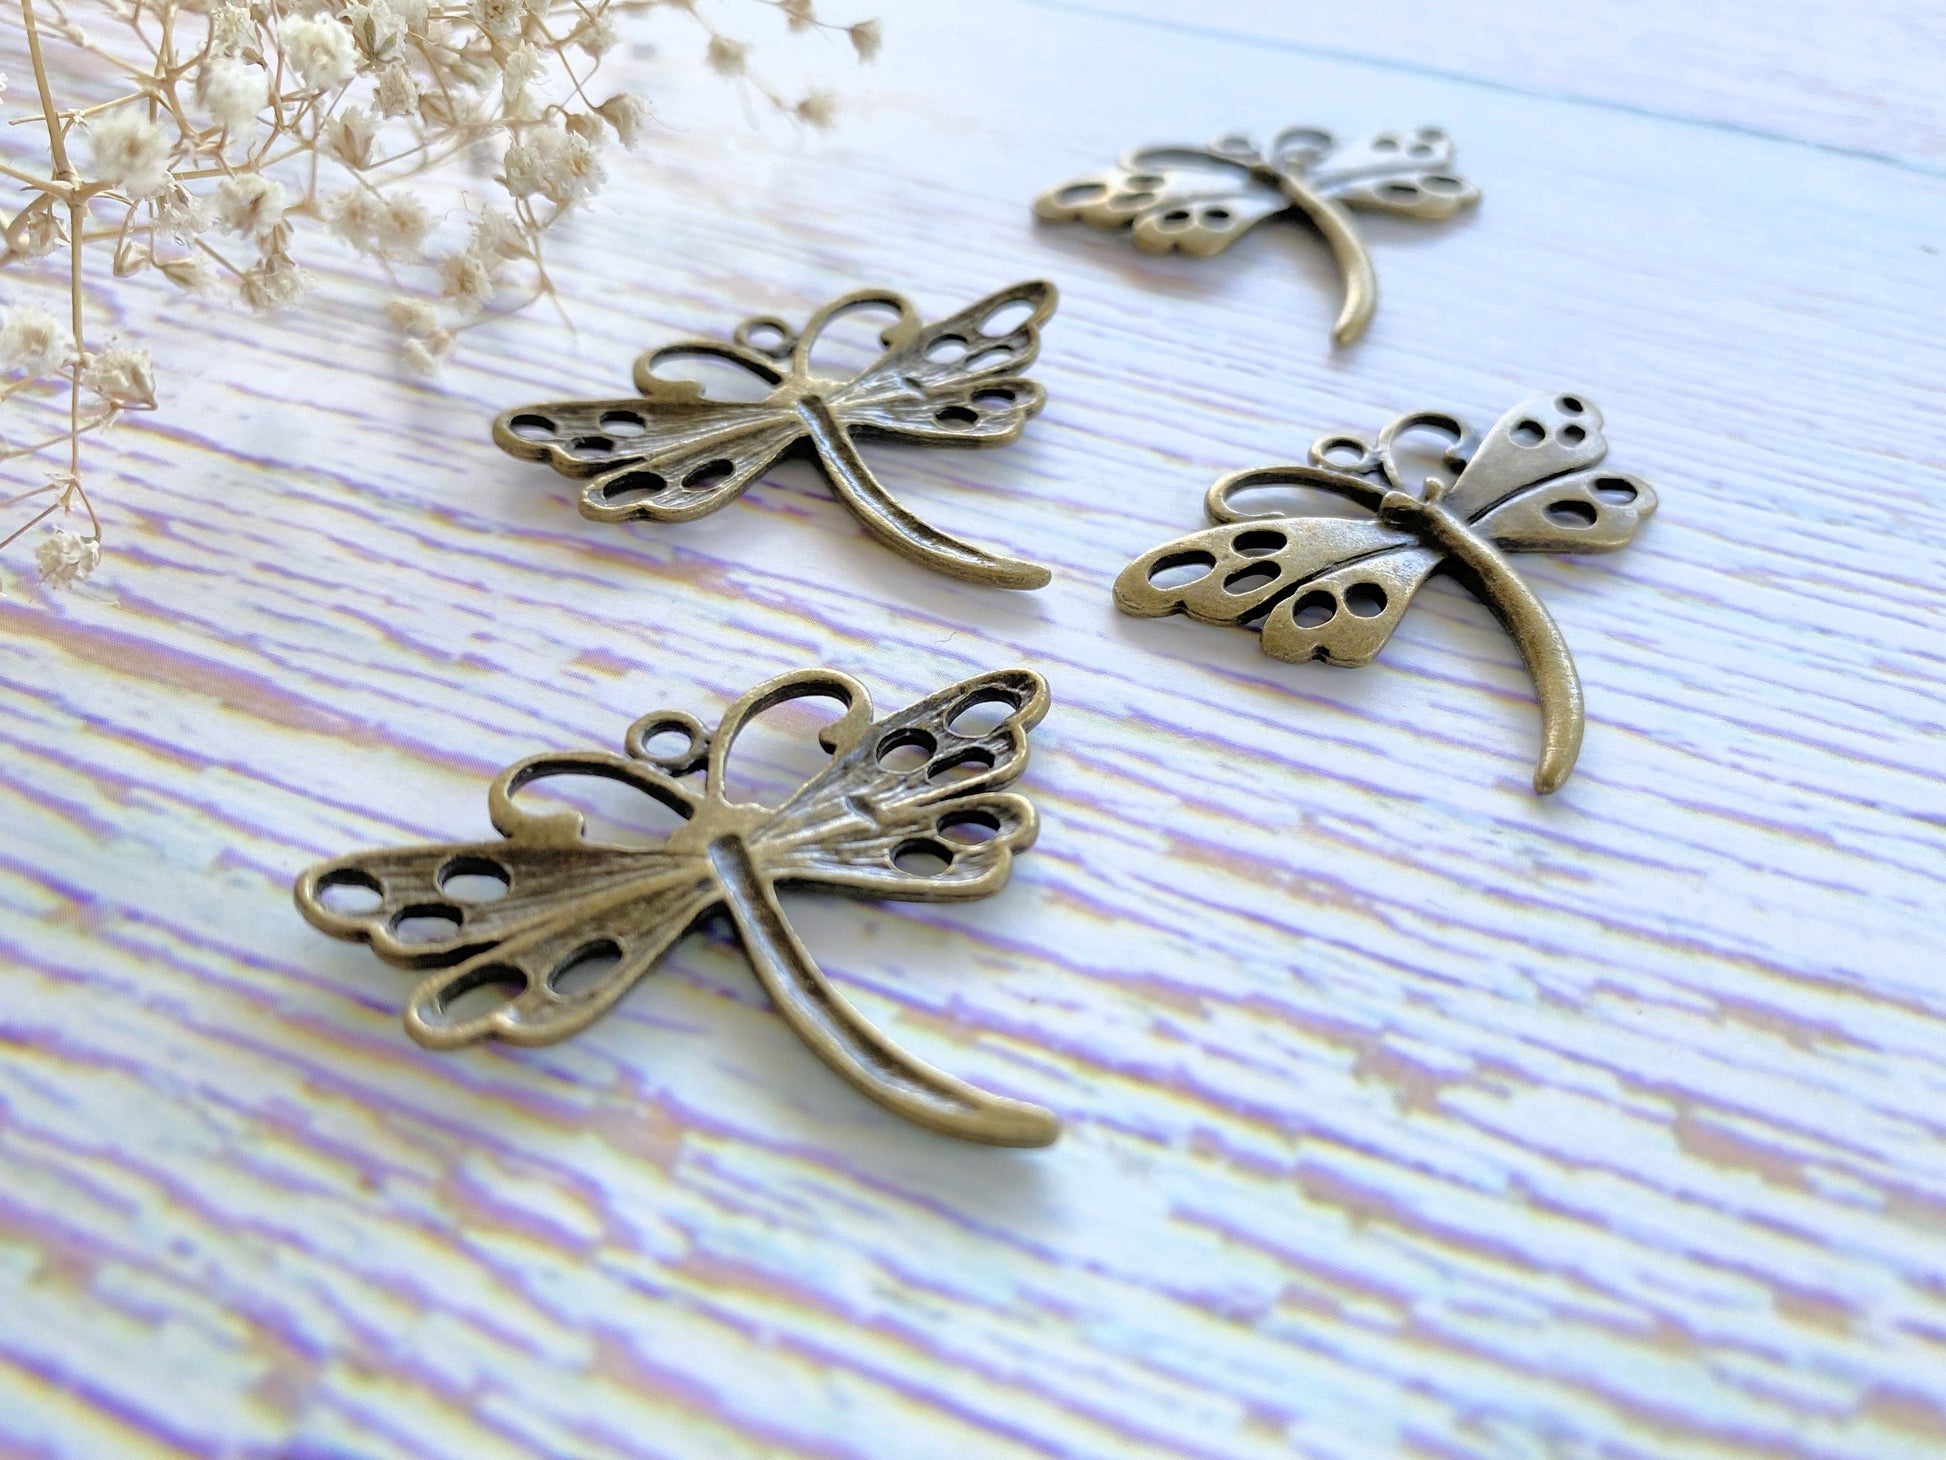 Charm Pendant 2pcs Dragonfly Charms for Assemblage Work Vialysa